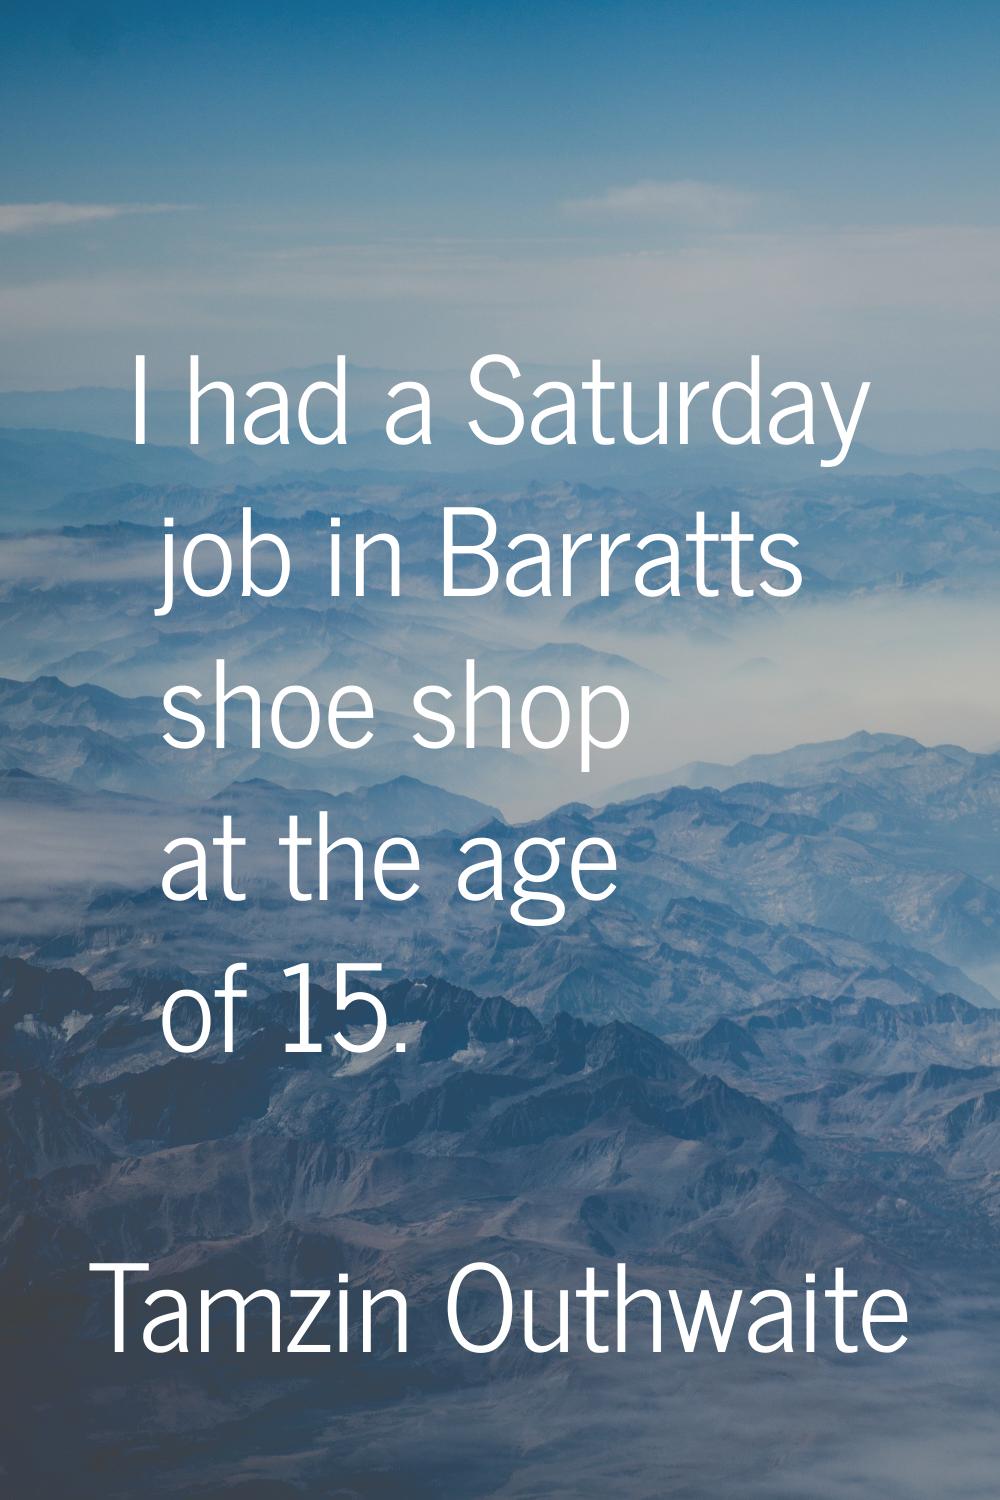 I had a Saturday job in Barratts shoe shop at the age of 15.